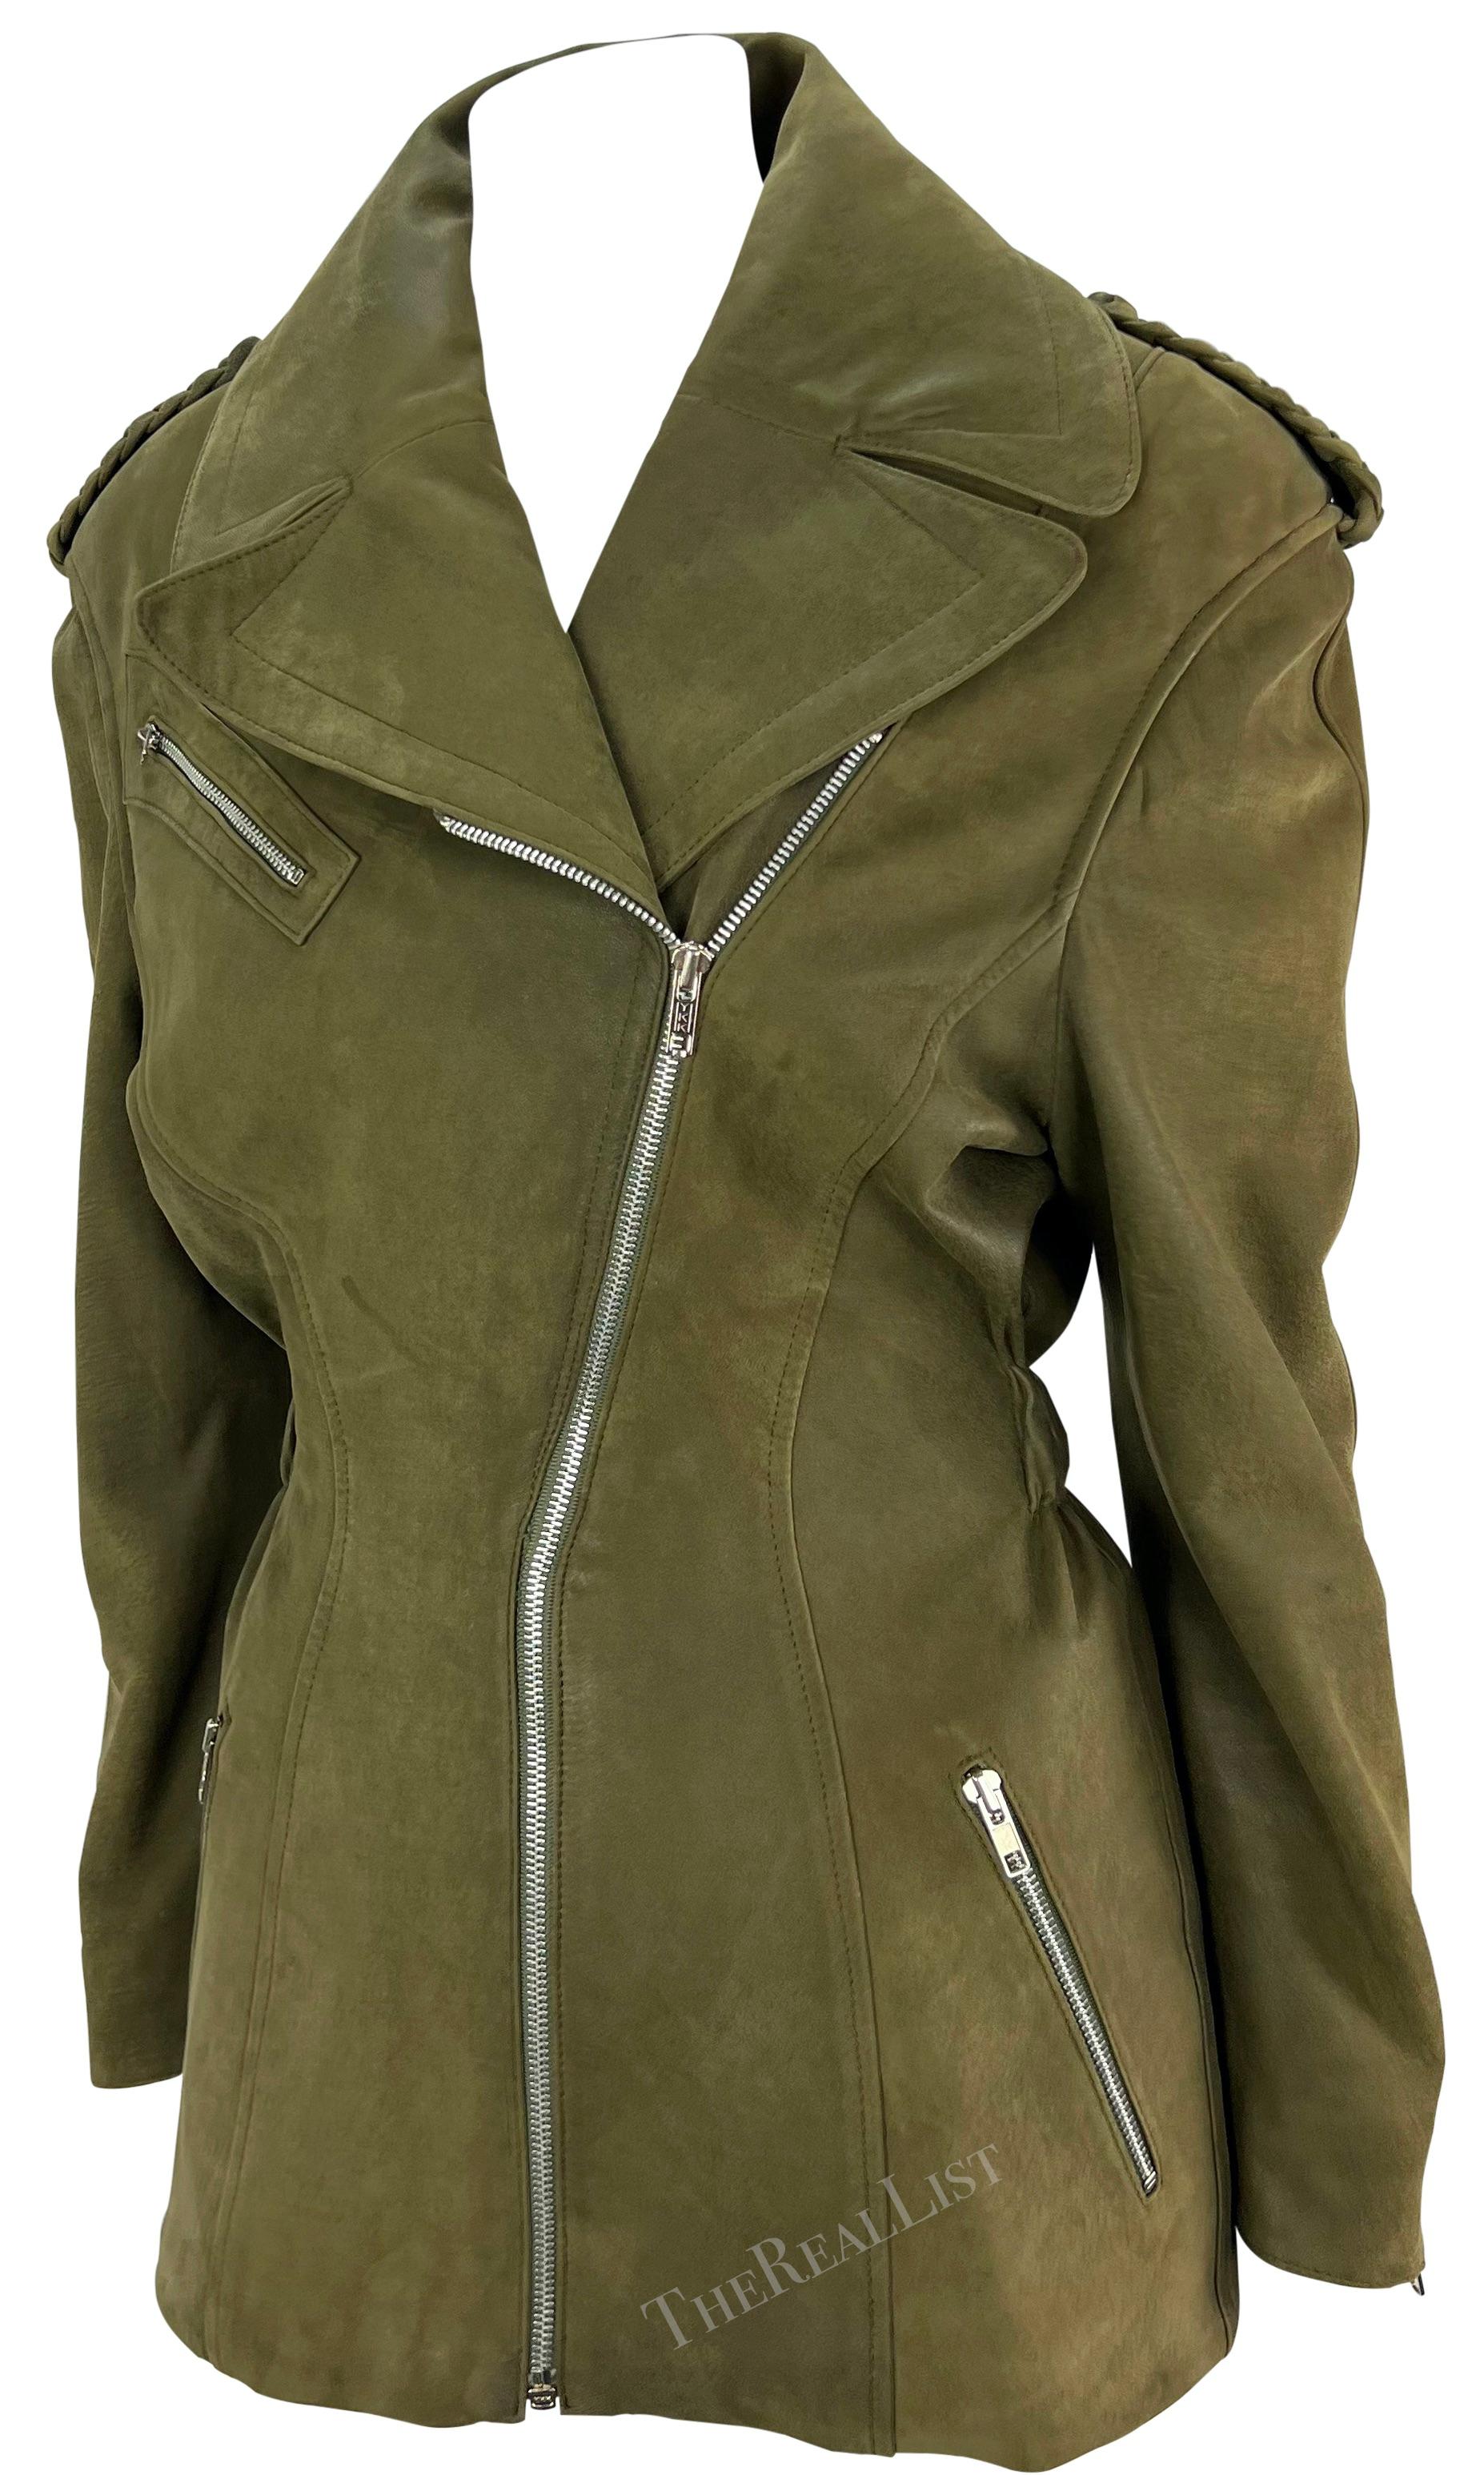 This striking olive green suede Thierry Mugler moto jacket was designed by Manfred Mugler in the the late 1980s. Crafted entirely from soft suede, this chic coat boasts a fold-over collar, braided epaulettes, and an asymmetric zipper for added